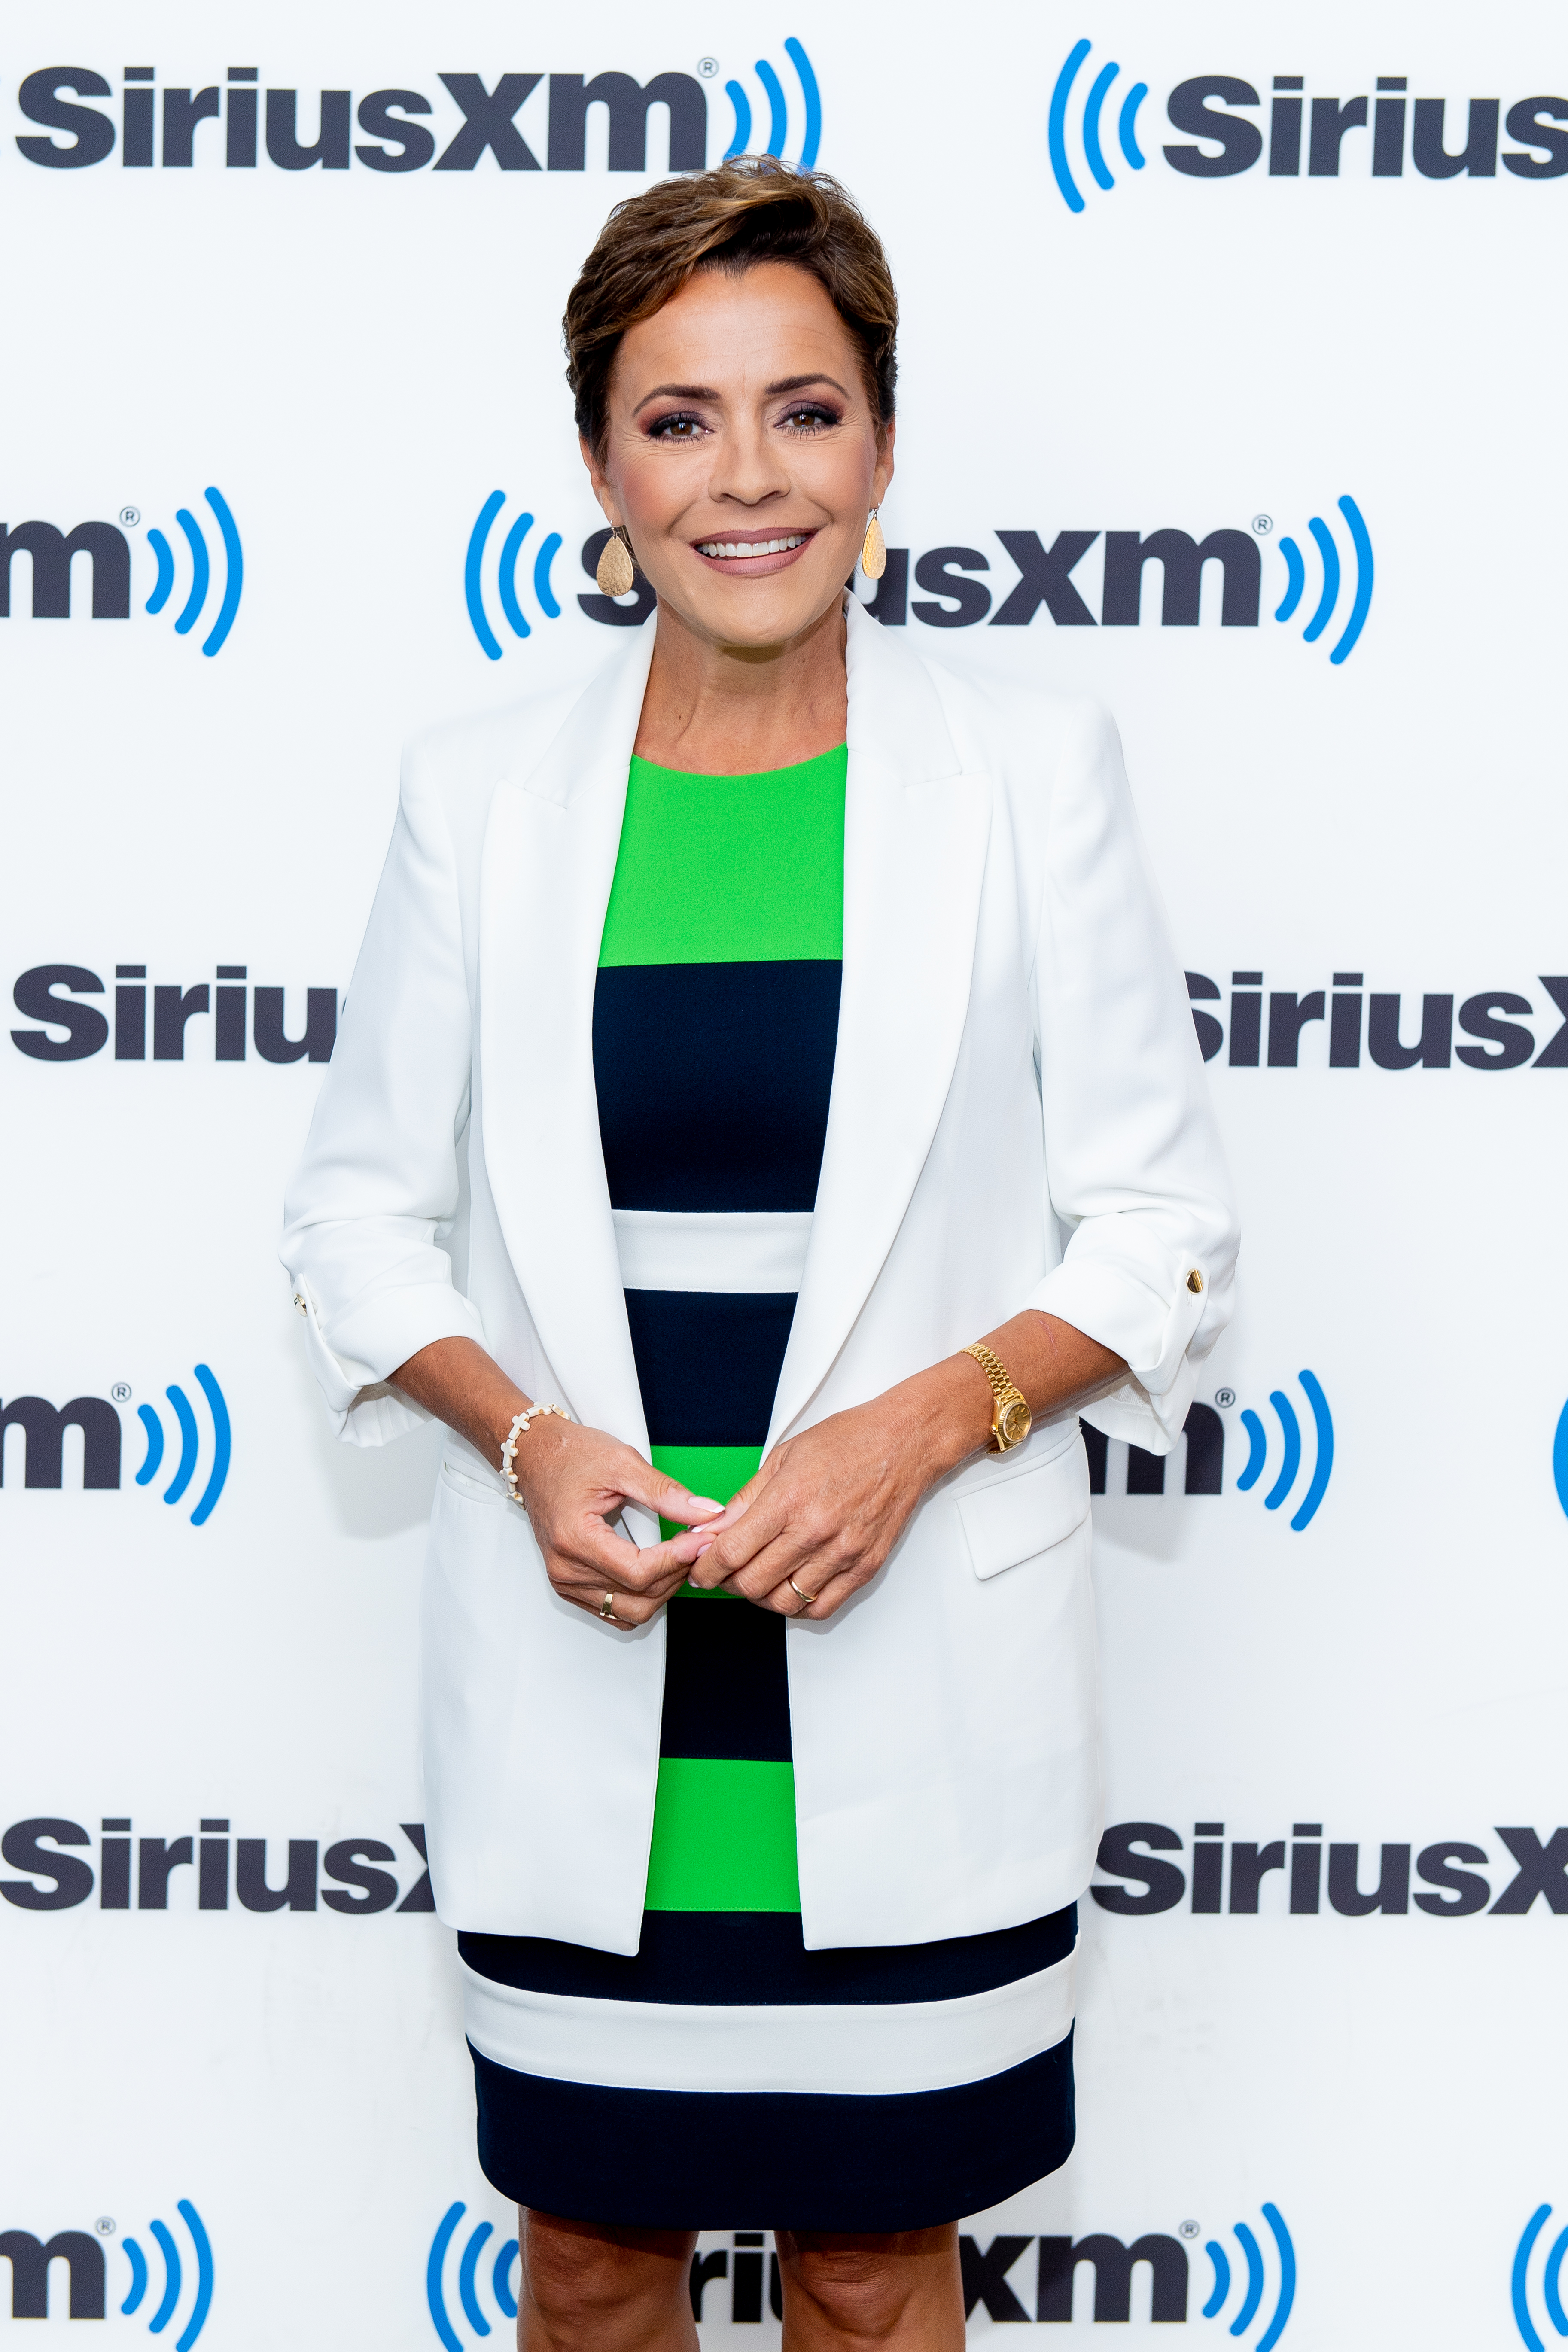 Kari Lake visits SiriusXM to discuss her book "Unafraid: Just Getting Started" at SiriusXM Studios on June 27, 2023, in New York City. | Source: Getty Images